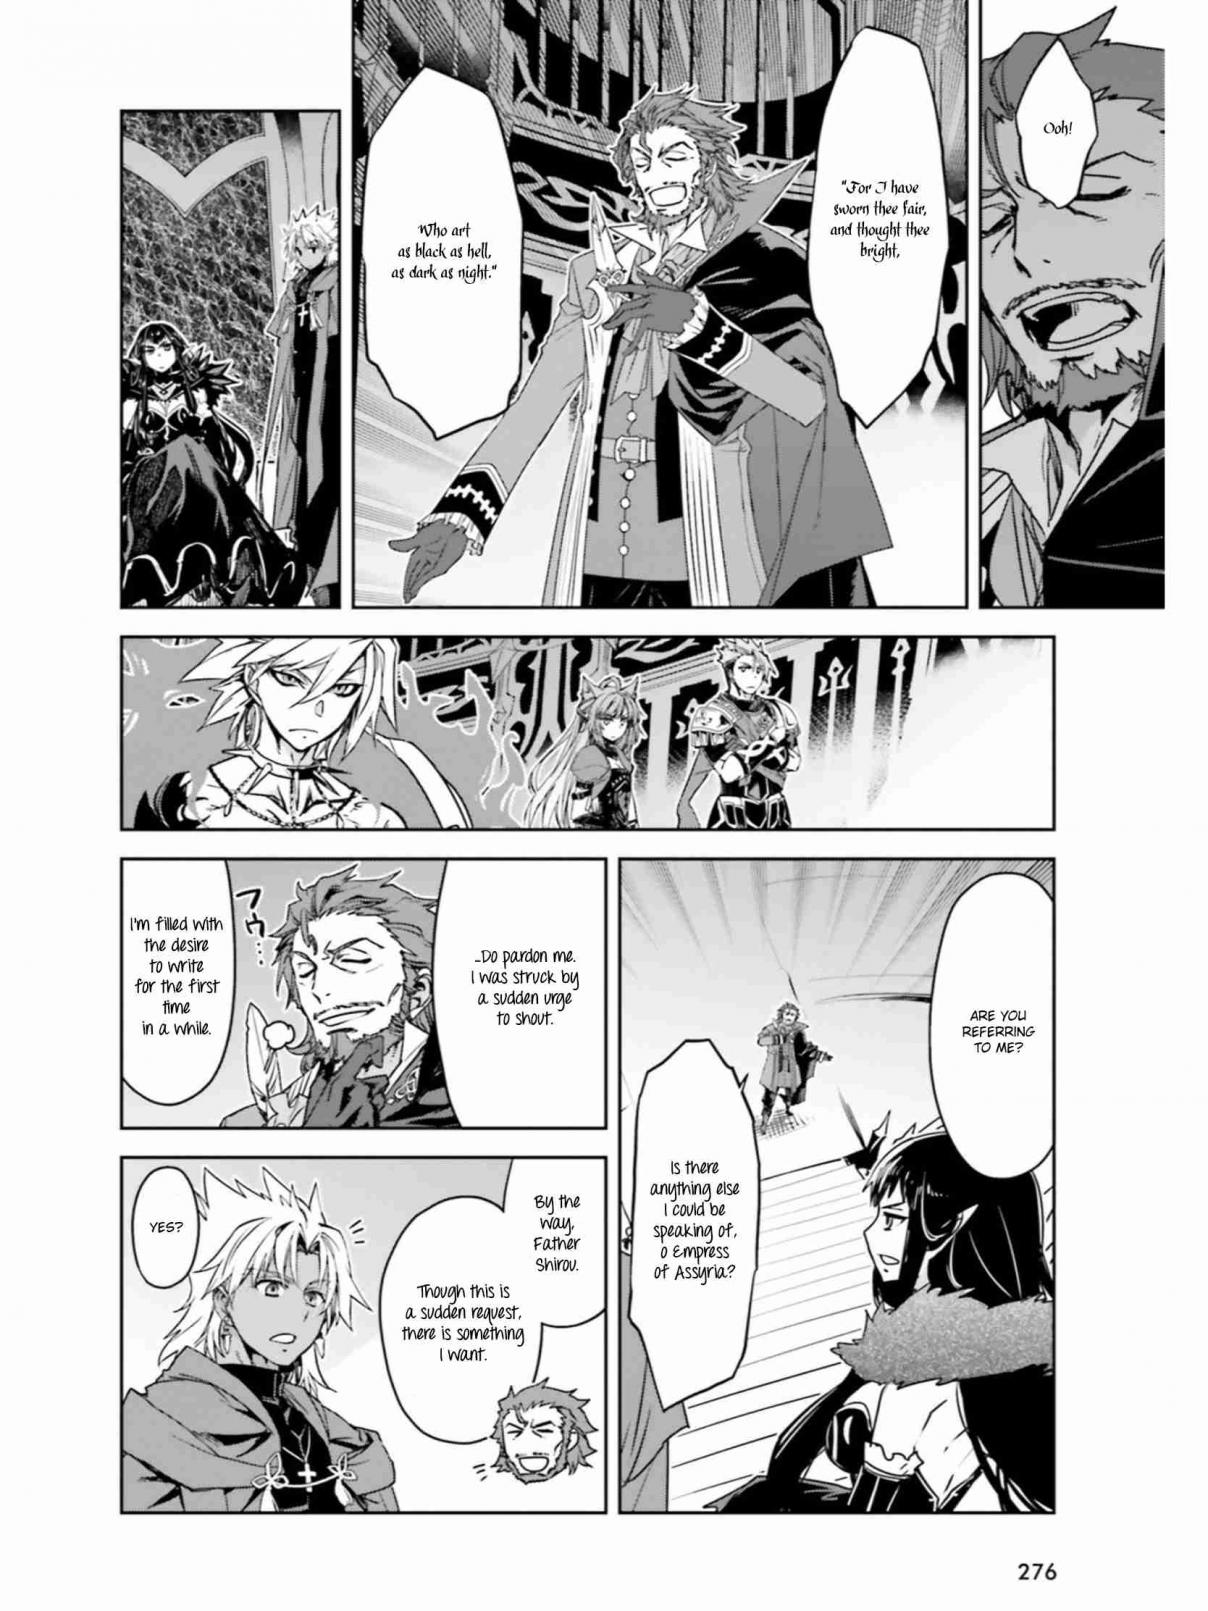 Fate/Apocrypha Ch. 20 Episode